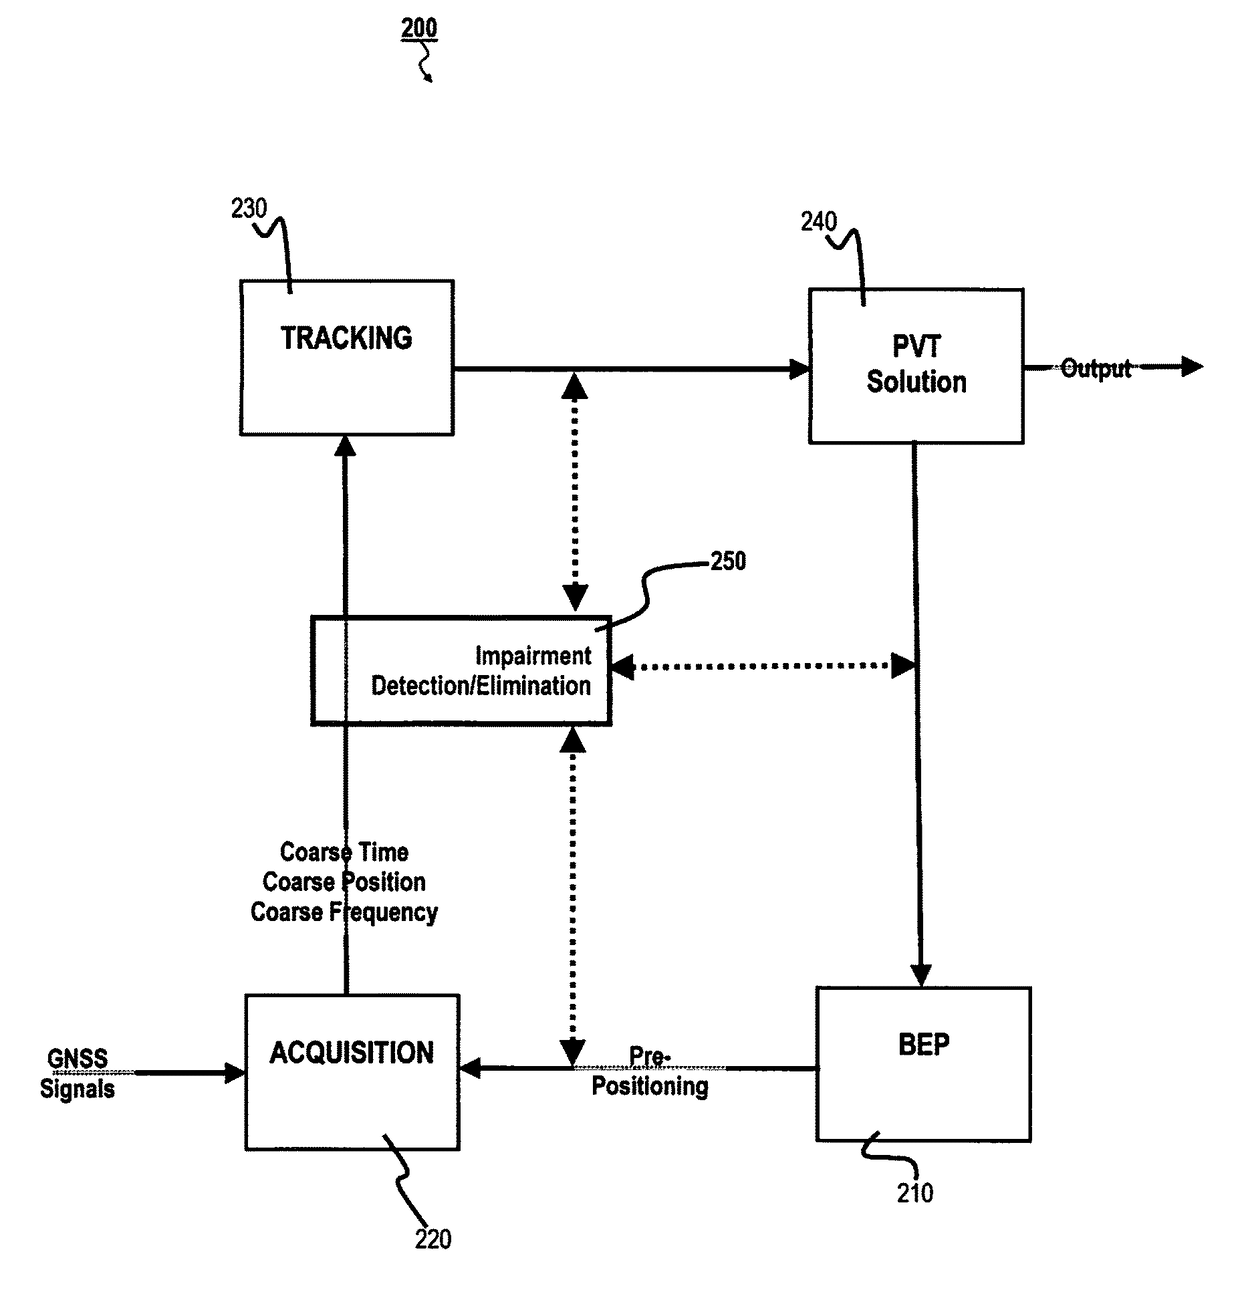 Method for efficiently detecting impairments in a multi-constellation GNSS receiver